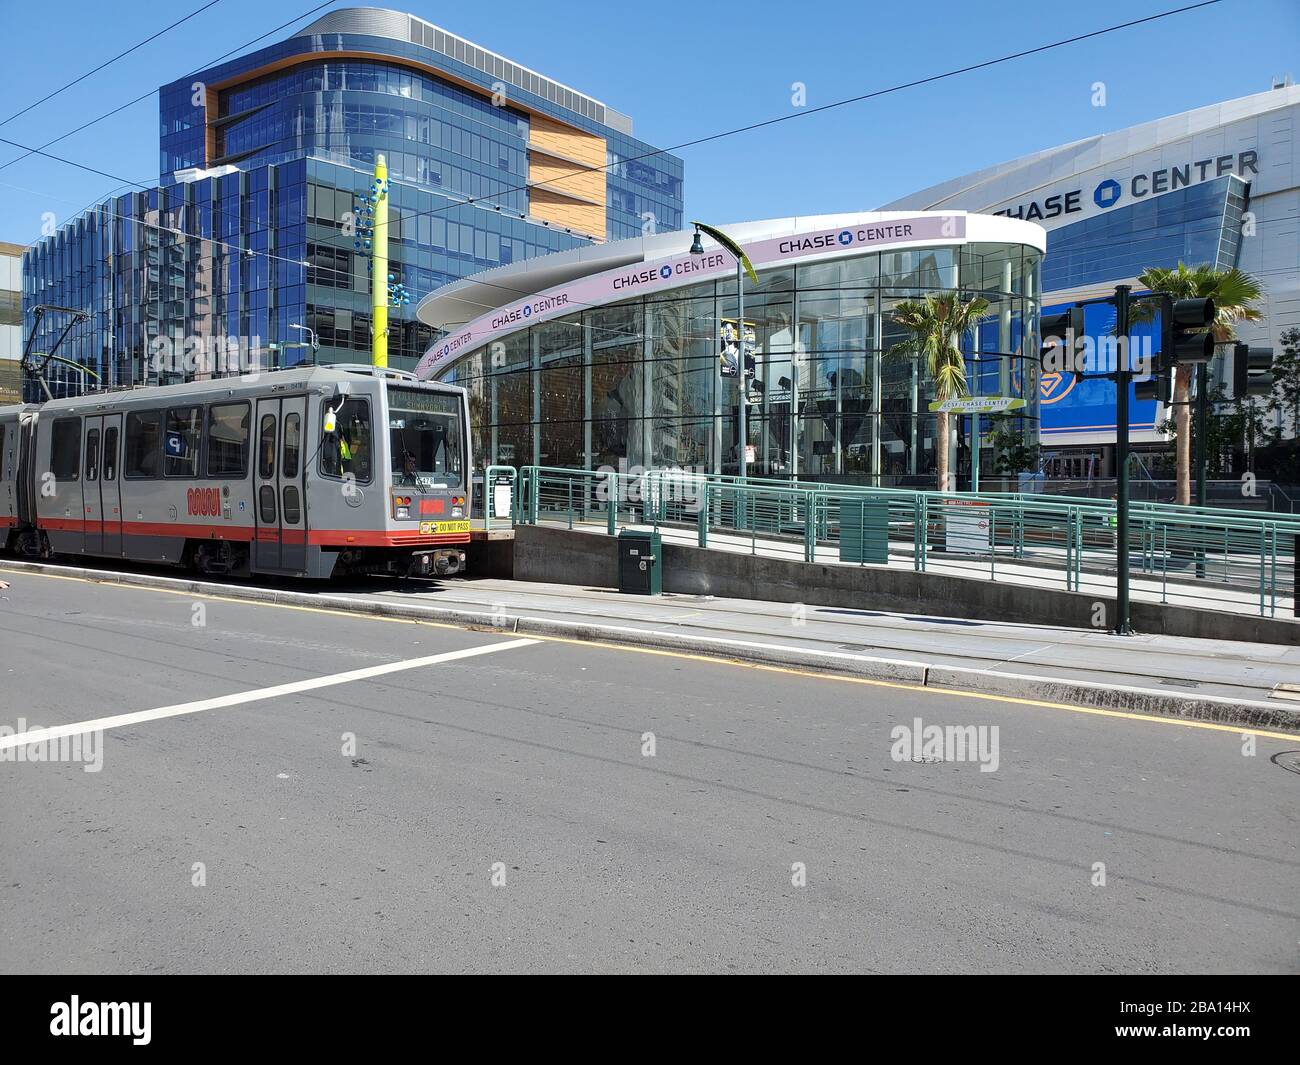 San Francisco Municipal Railroad (MUNI) trains continued to operate during a lockdown during an outbreak of the COVID-19 coronavirus in San Francisco, California, March 19, 2020. () Stock Photo